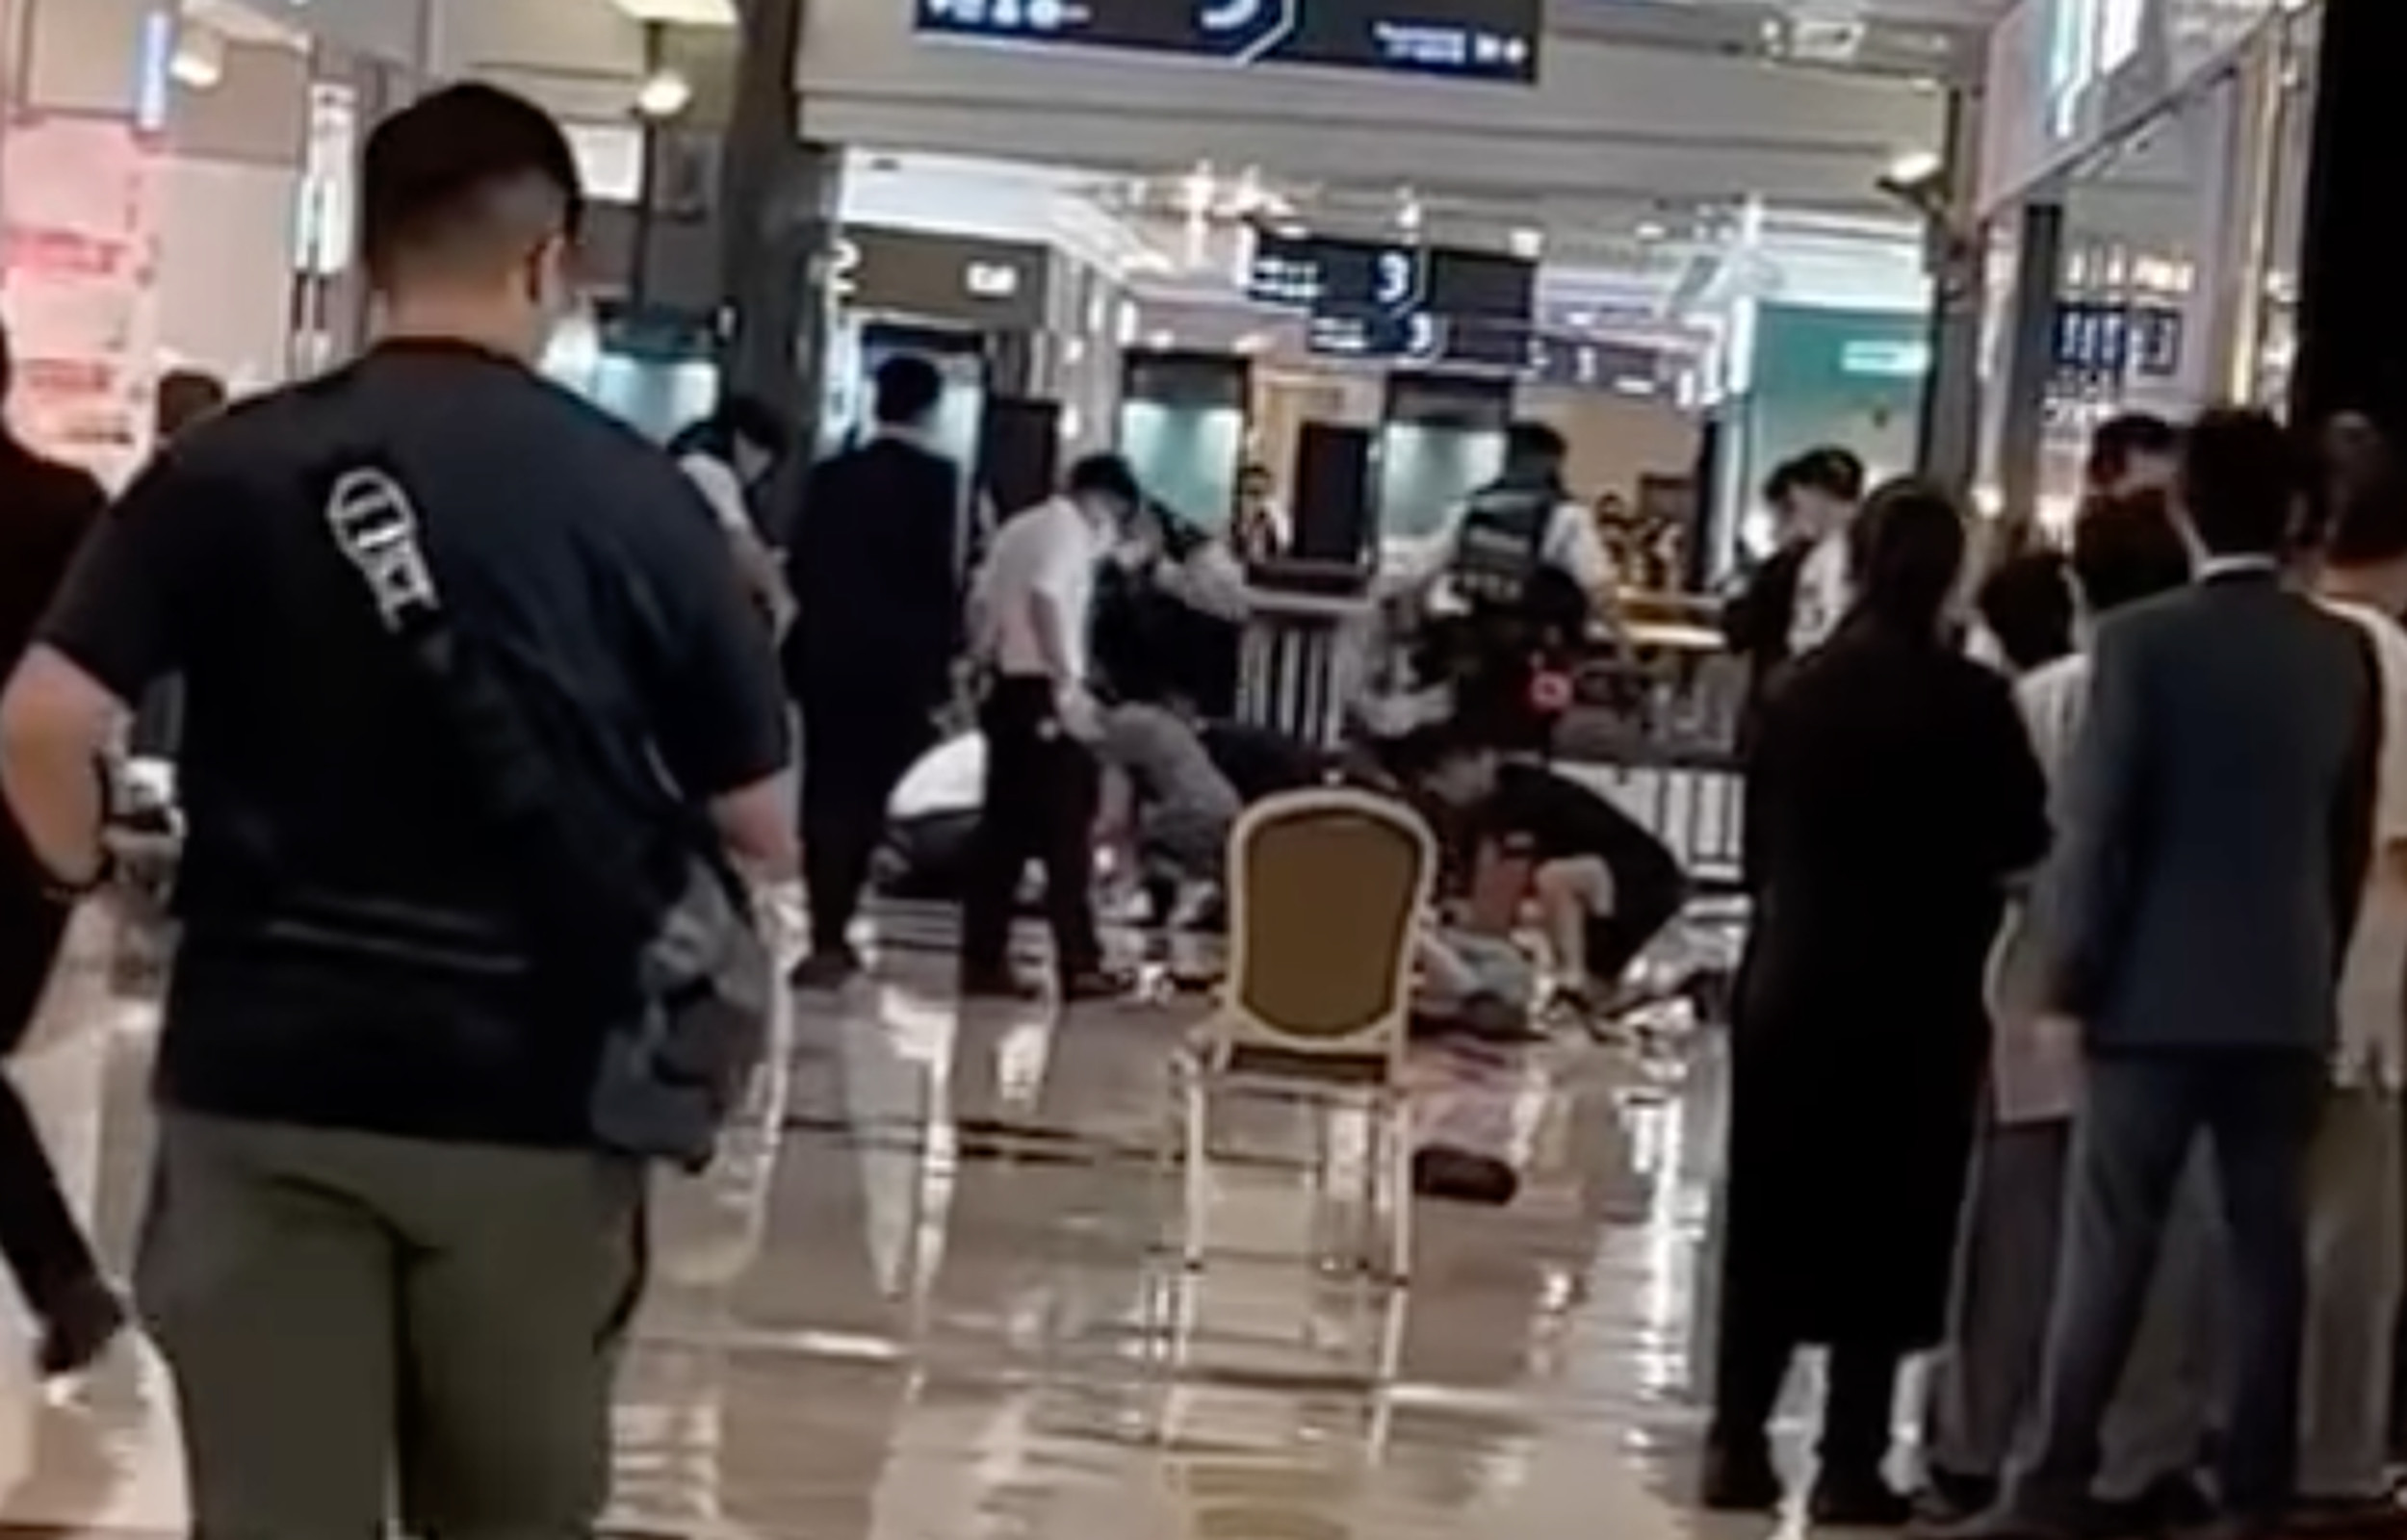 Viral footage of the fatal stabbing of two women at a Hong Kong shopping mall has prompted public safety concerns. Photo: Facebook/Bosco Chu